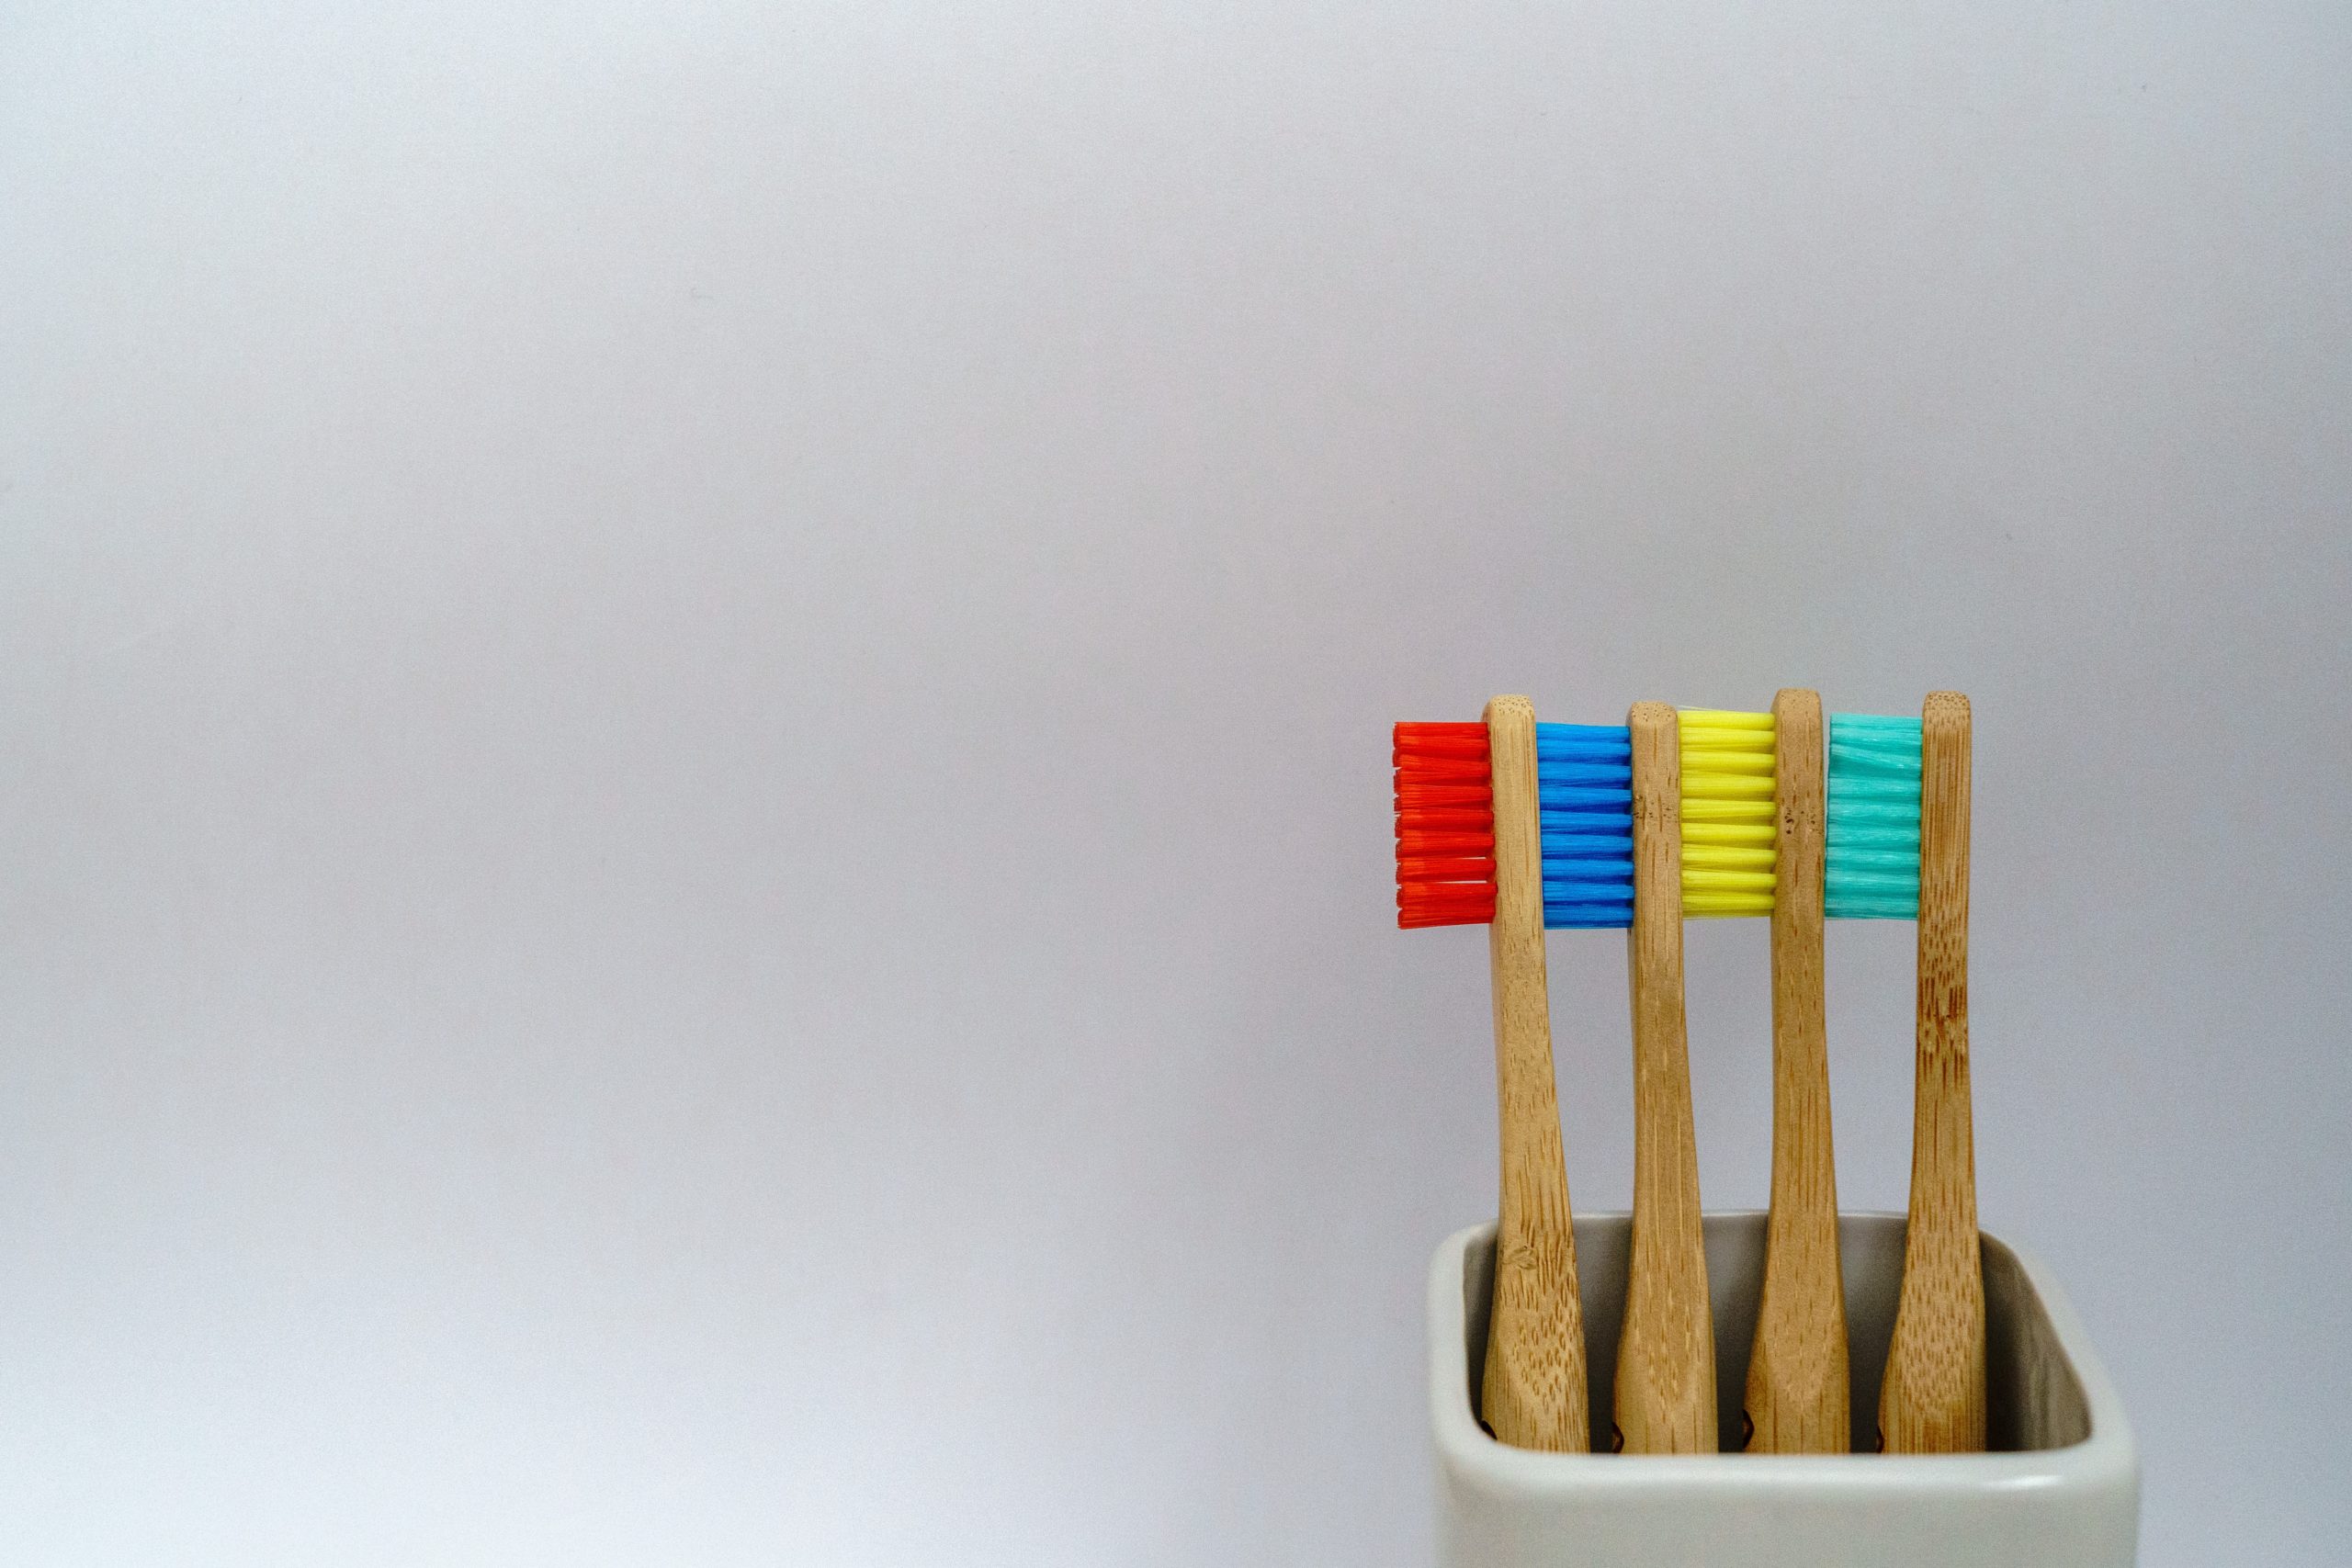 Wooden handle toothbrushes with bristles of various colors: red, blue, yellow, and green